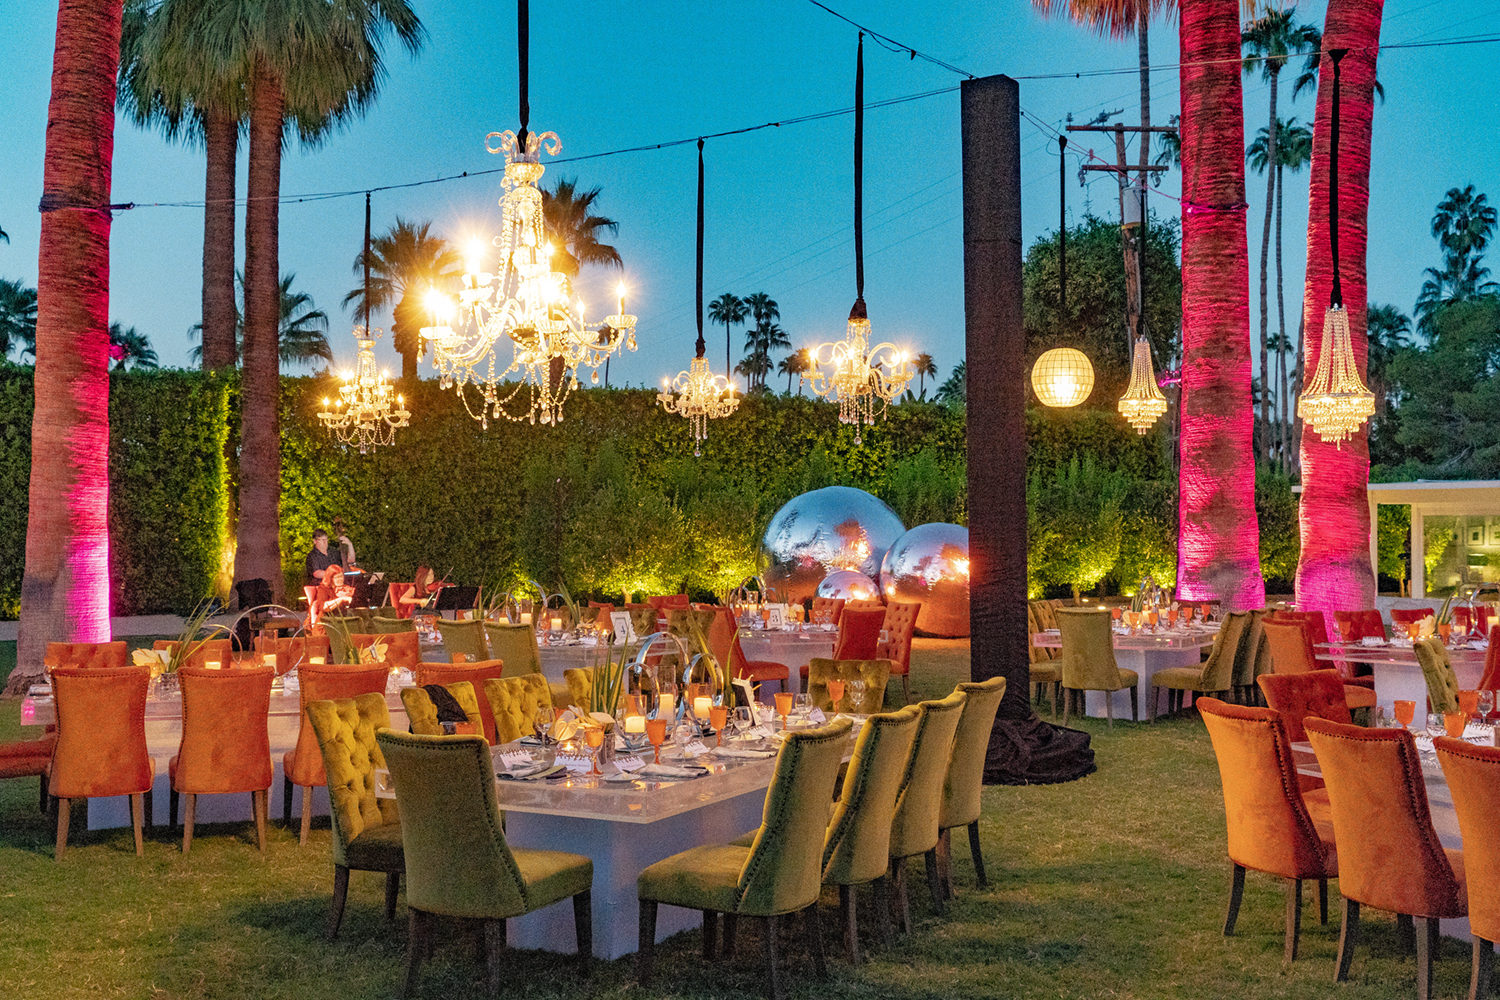 Desert Drama AOO Events Turns Up the Heat in Palm Springs Special Events